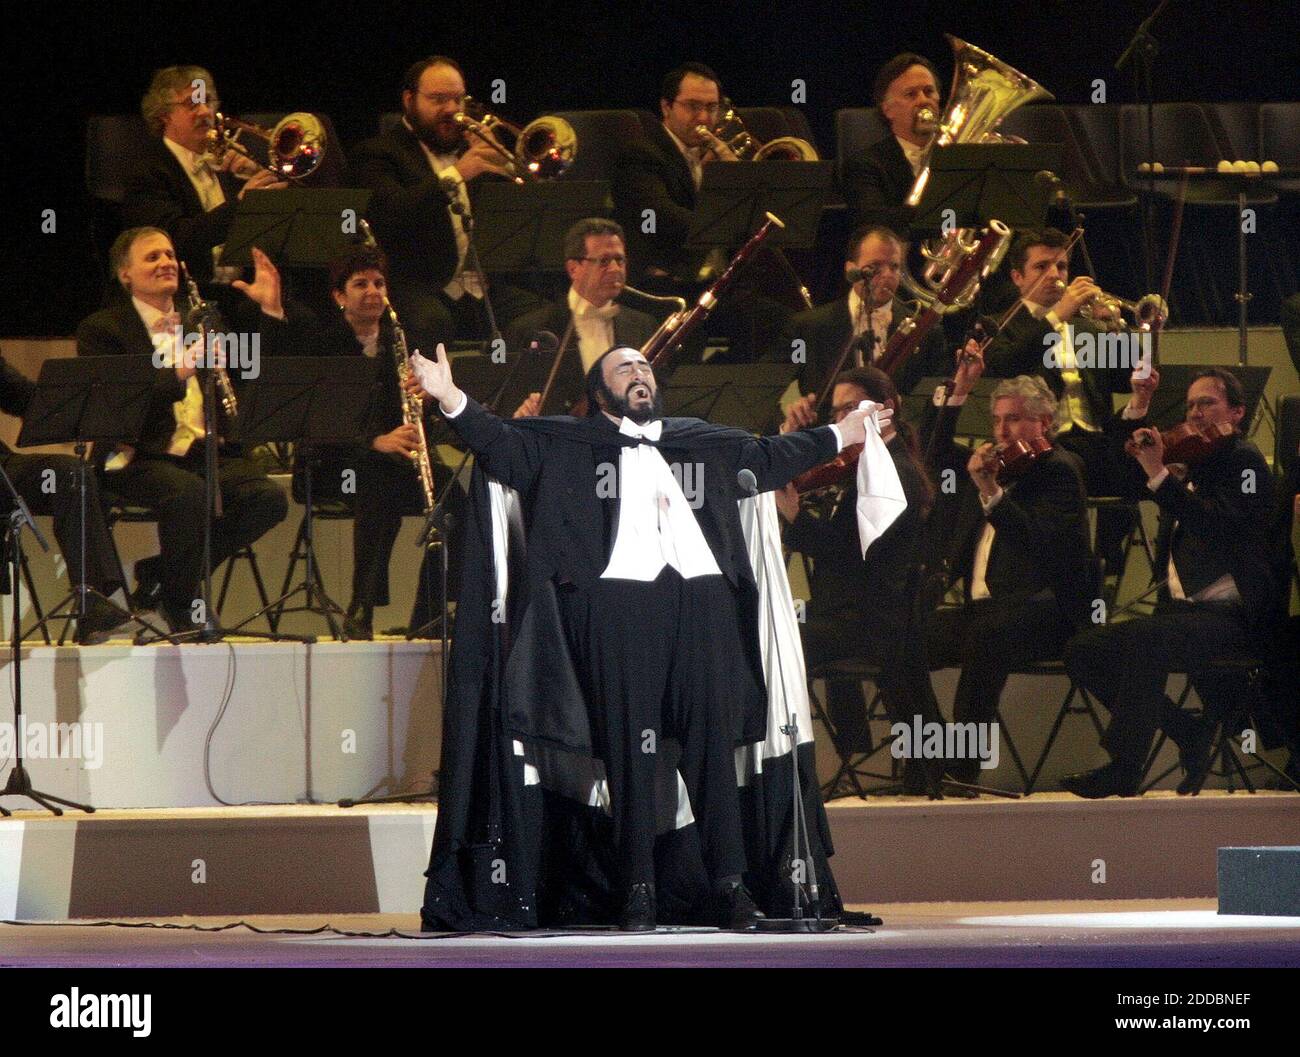 NO FILM, NO VIDEO, NO TV, NO DOCUMENTARY - Italian singer Luciano Pavarotti sings on stage at the Olympic Stadium during the opening ceremonies of the 2006 Winter Olympics in Turin, Italy on February 10, 2006. Photo by Gary Reyes/San Jose Mercury News/KRT/CAMELEON/ABACAPRESS.COM Stock Photo